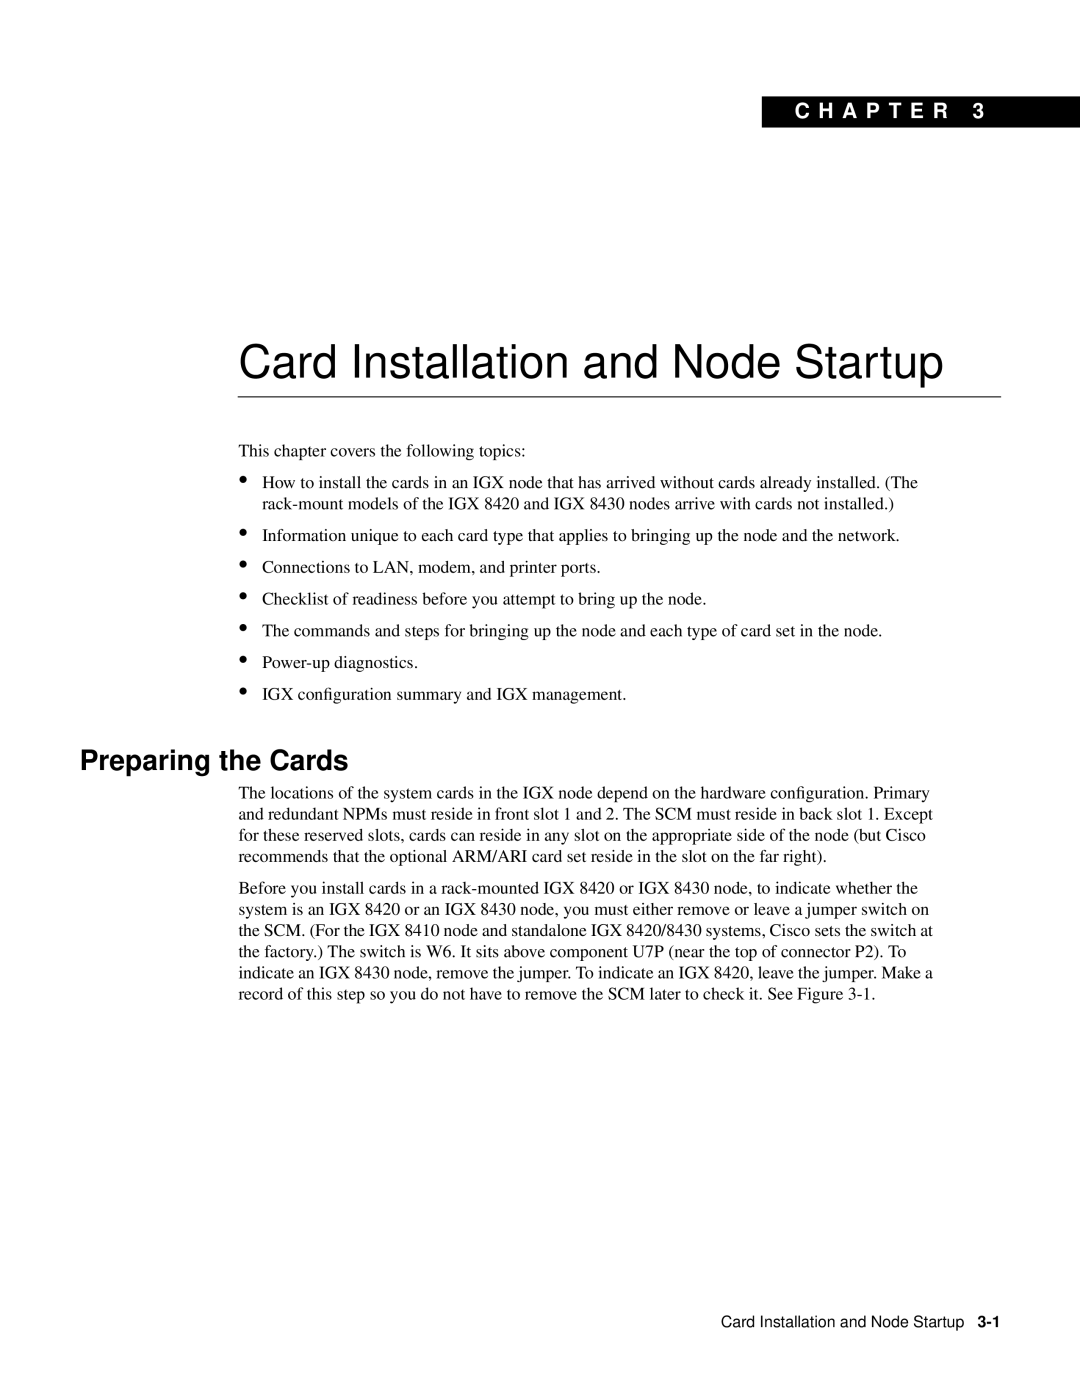 Cisco Systems IGX 8400 Series manual Preparing the Cards, Card Installation and Node Startup, C H A P T E R 